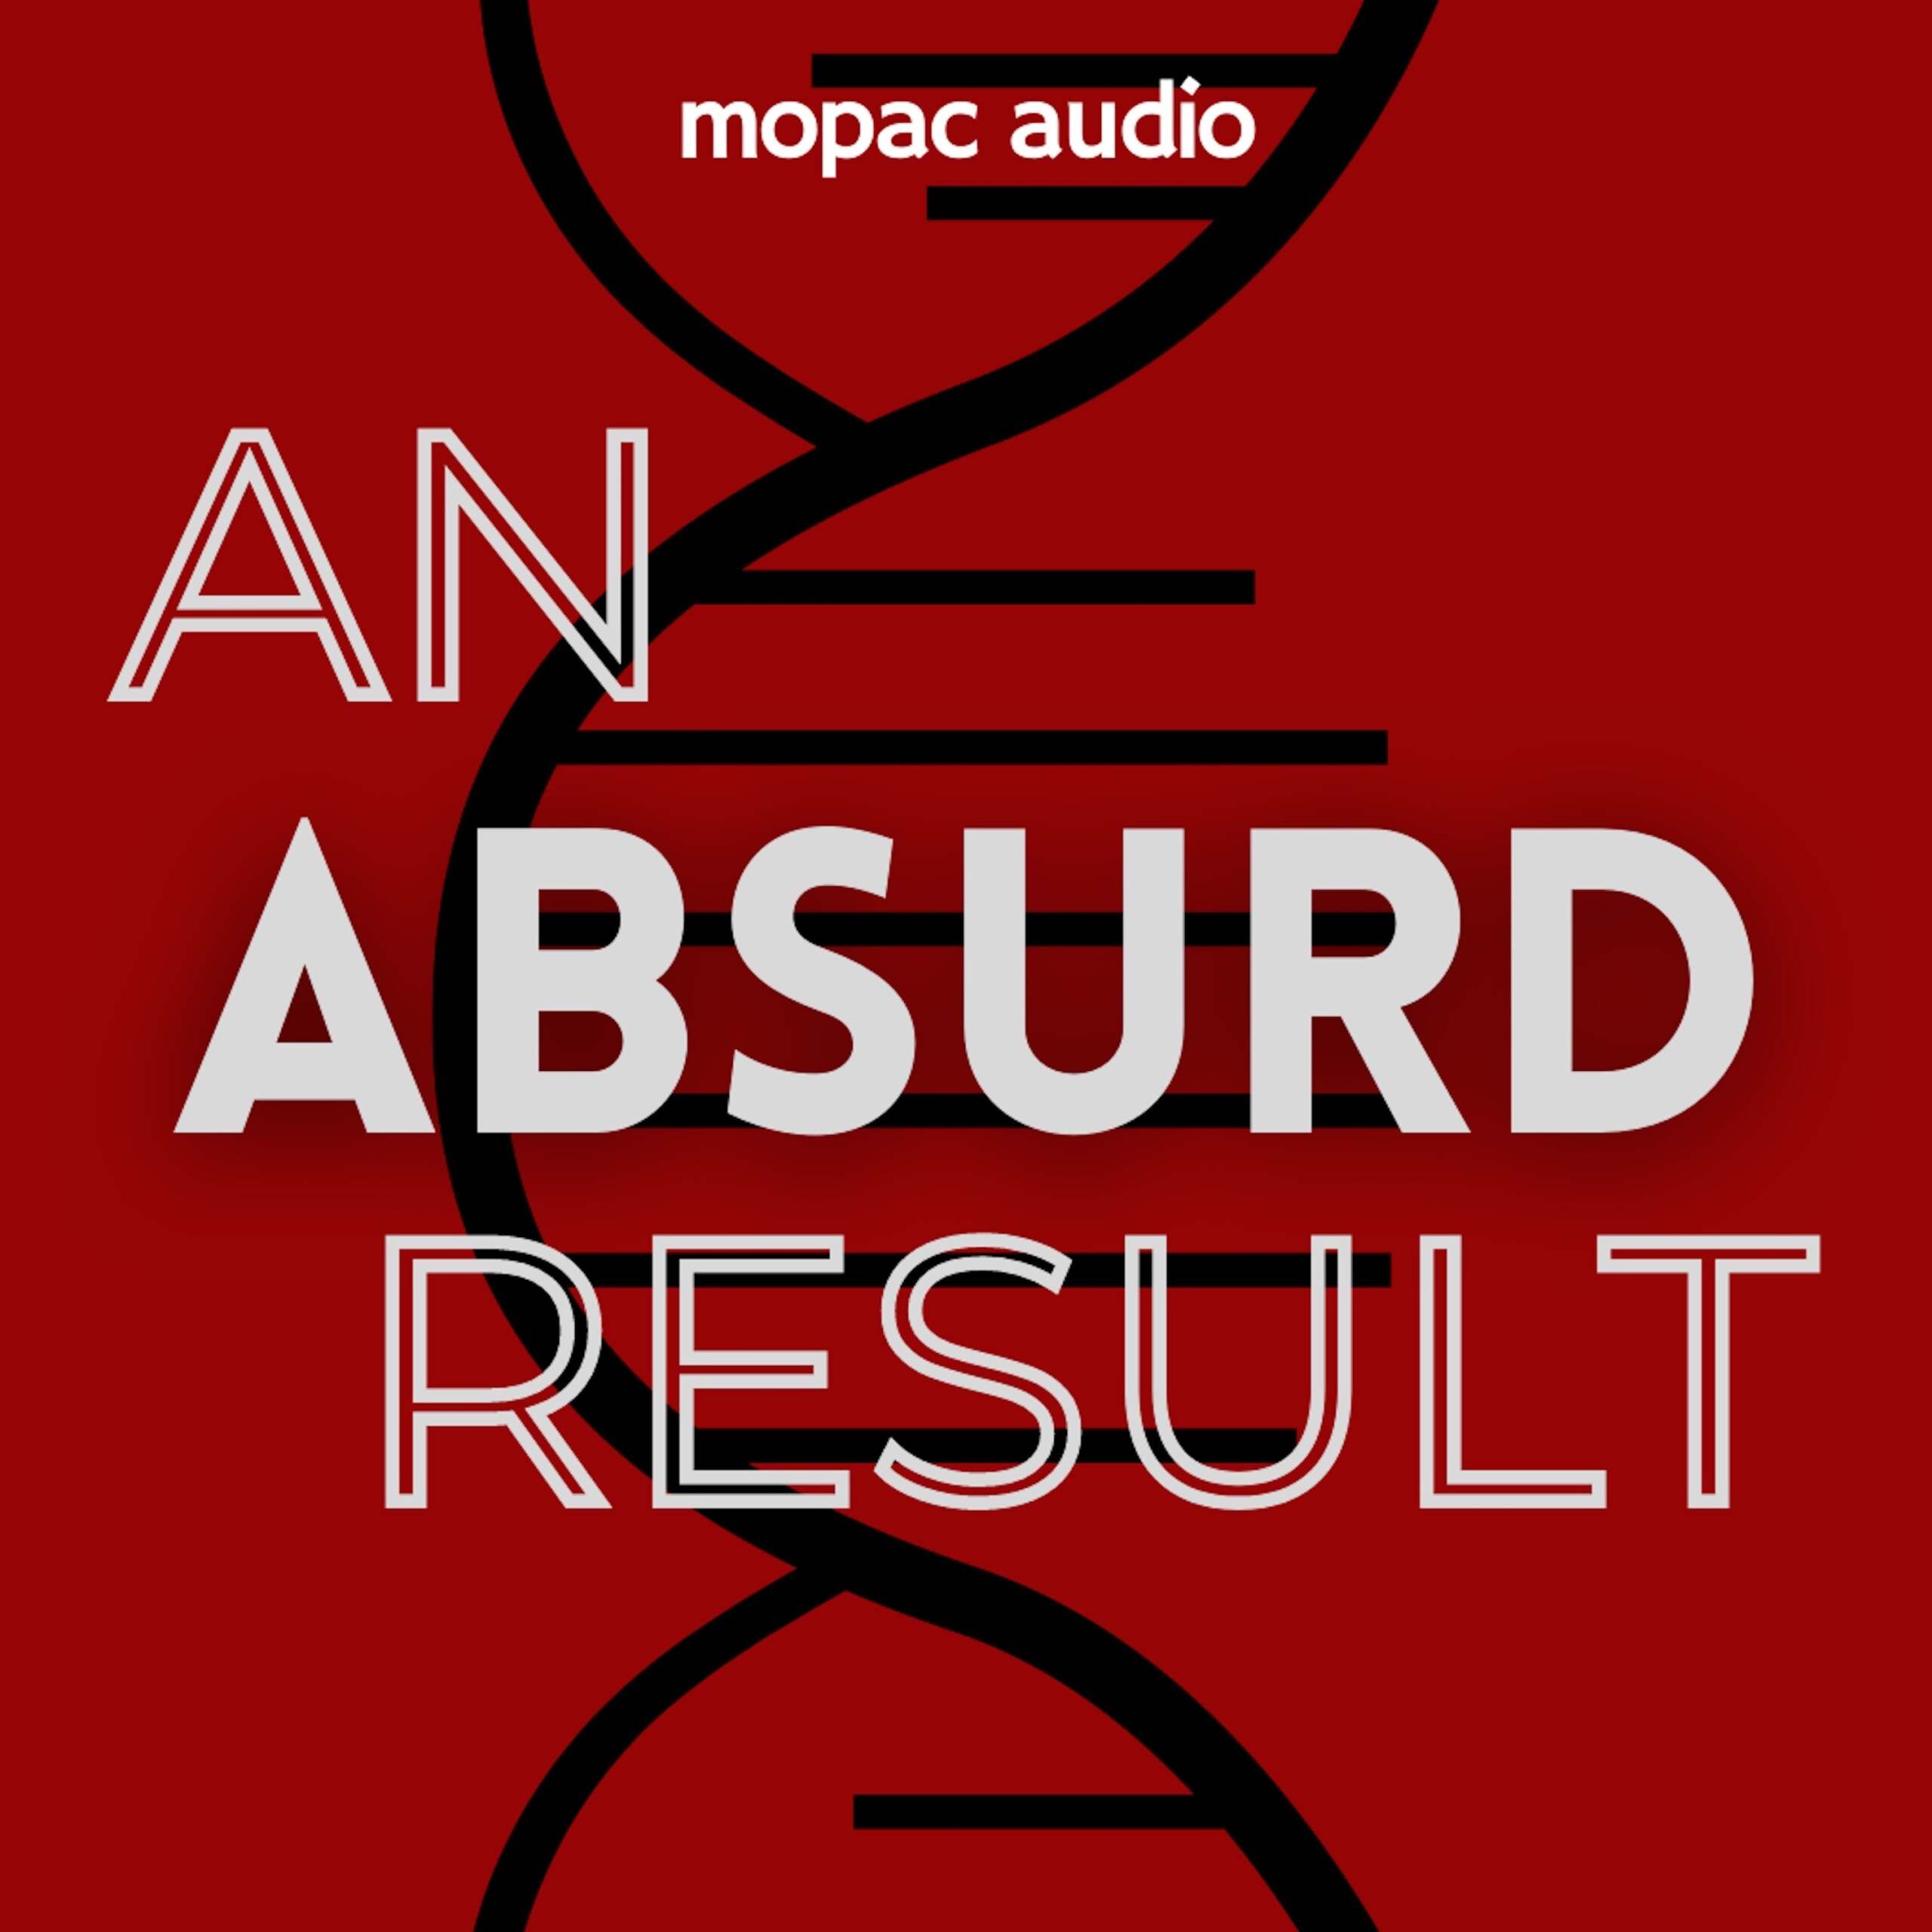 Mopac Audio Debuts True Crime Podcast, 'An Absurd Result', New First Hand Account Of Case Exposing Issues With Today's Legal System